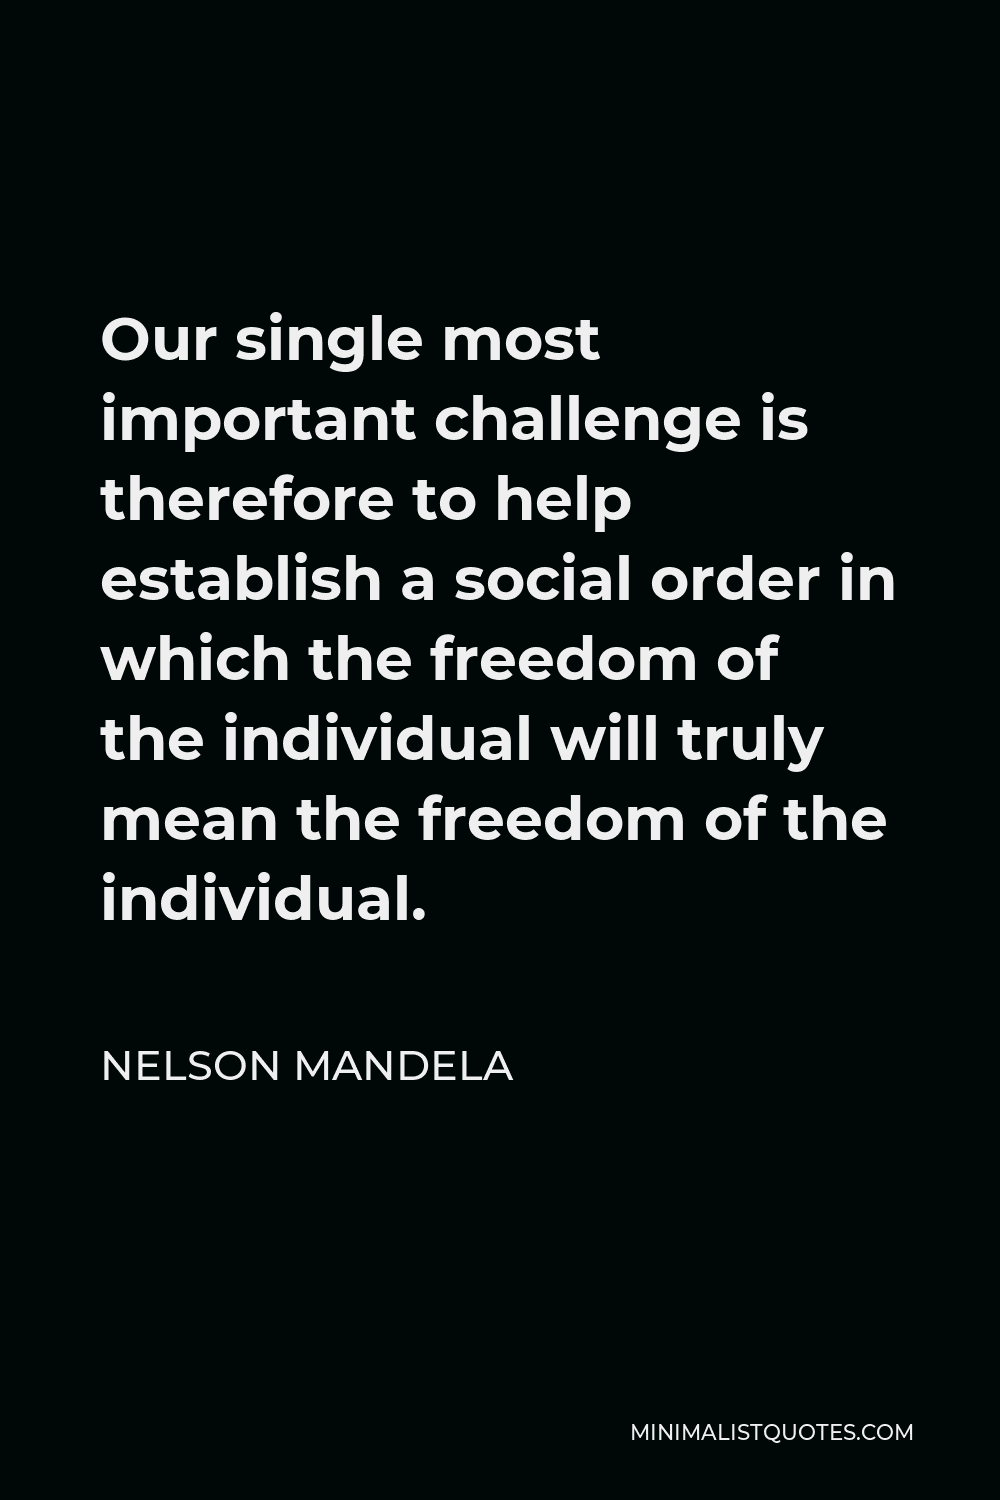 Nelson Mandela Quote - Our single most important challenge is therefore to help establish a social order in which the freedom of the individual will truly mean the freedom of the individual.